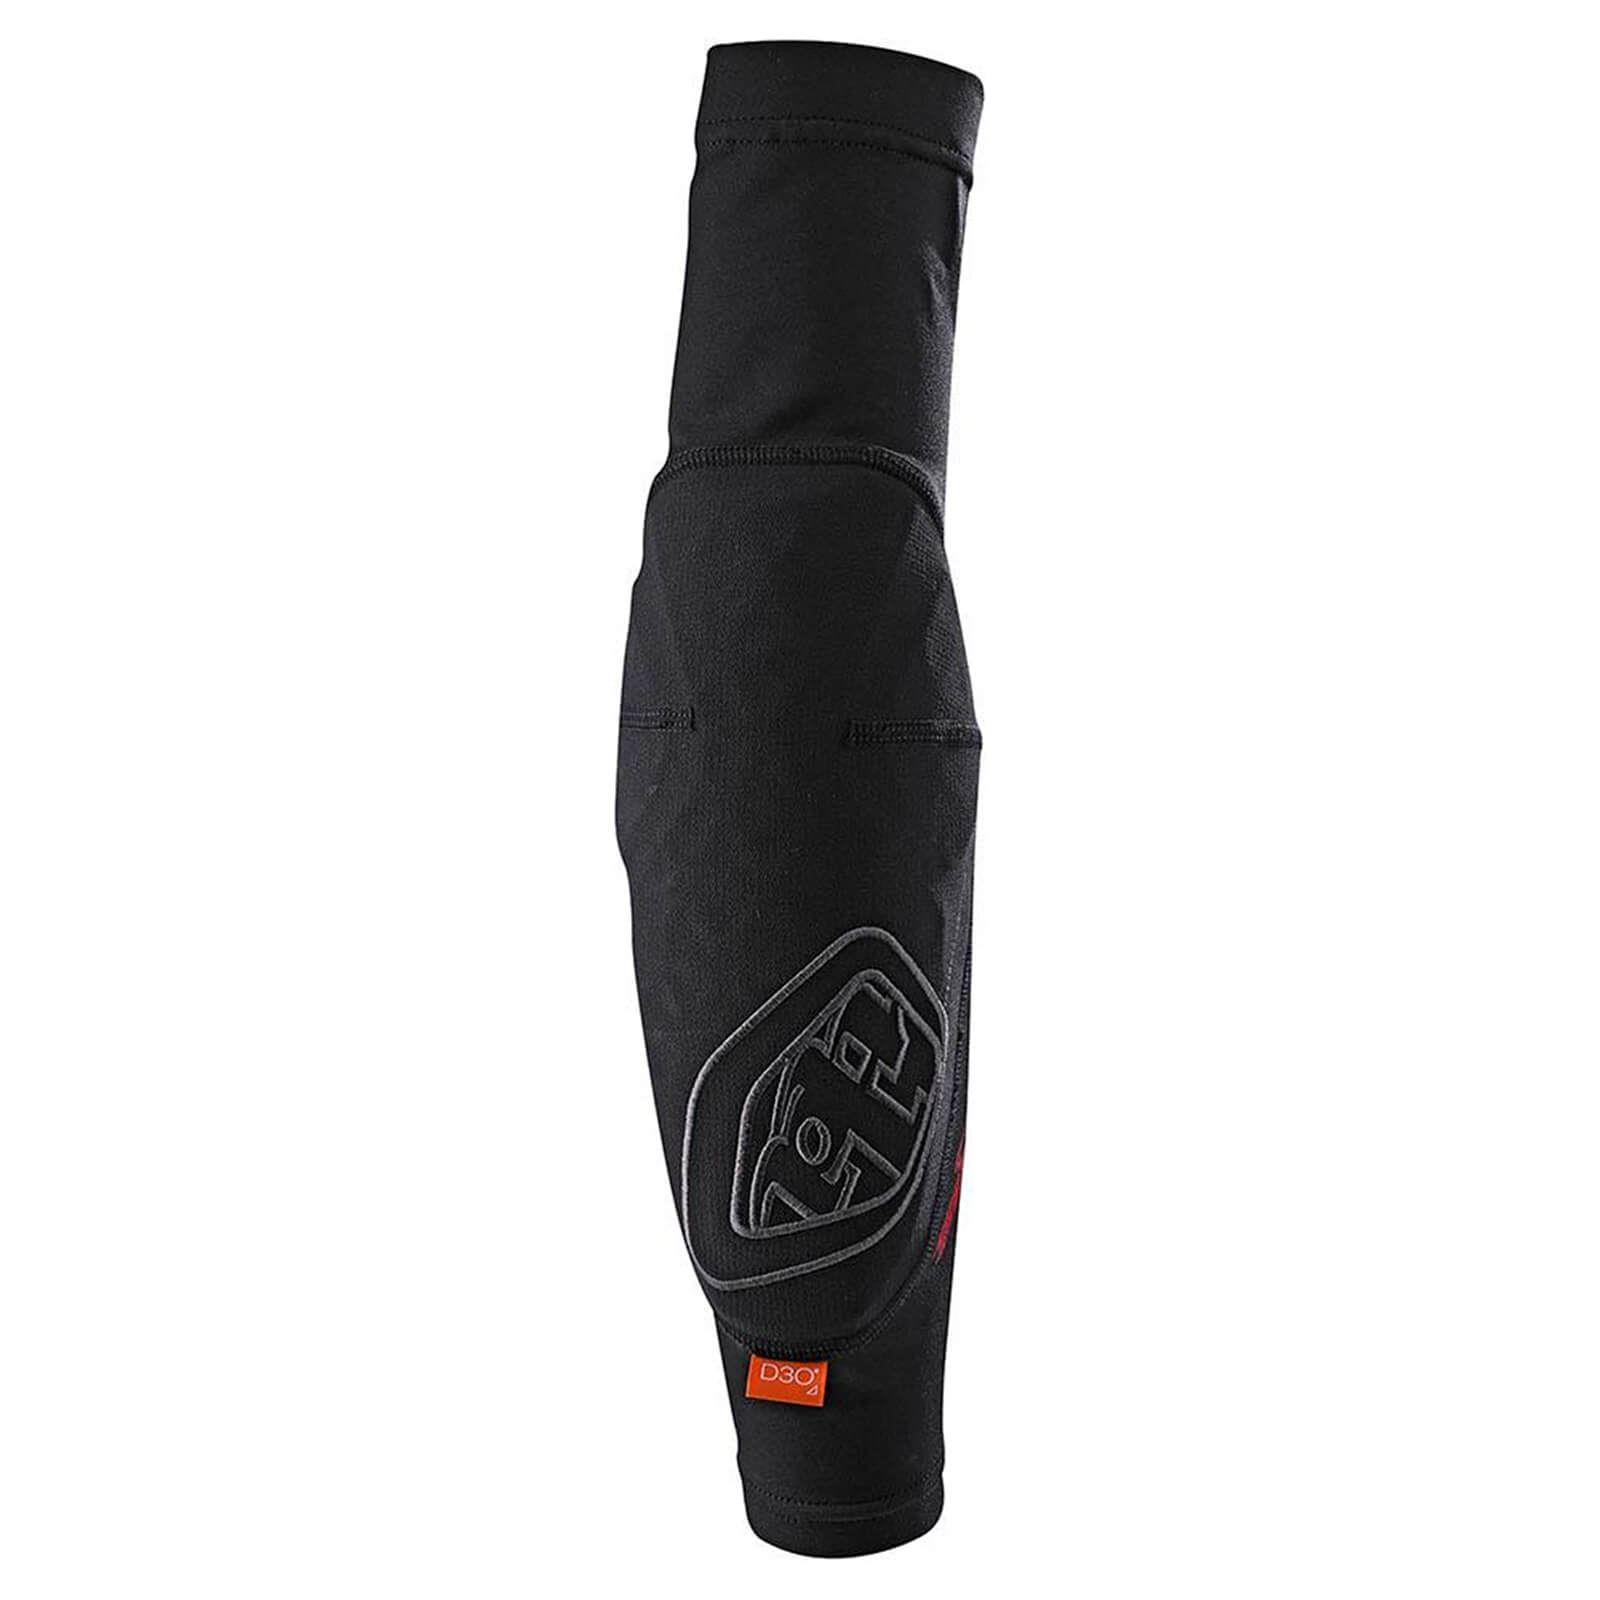 Troy Lee Designs Stage Elbow Guard - XS/S